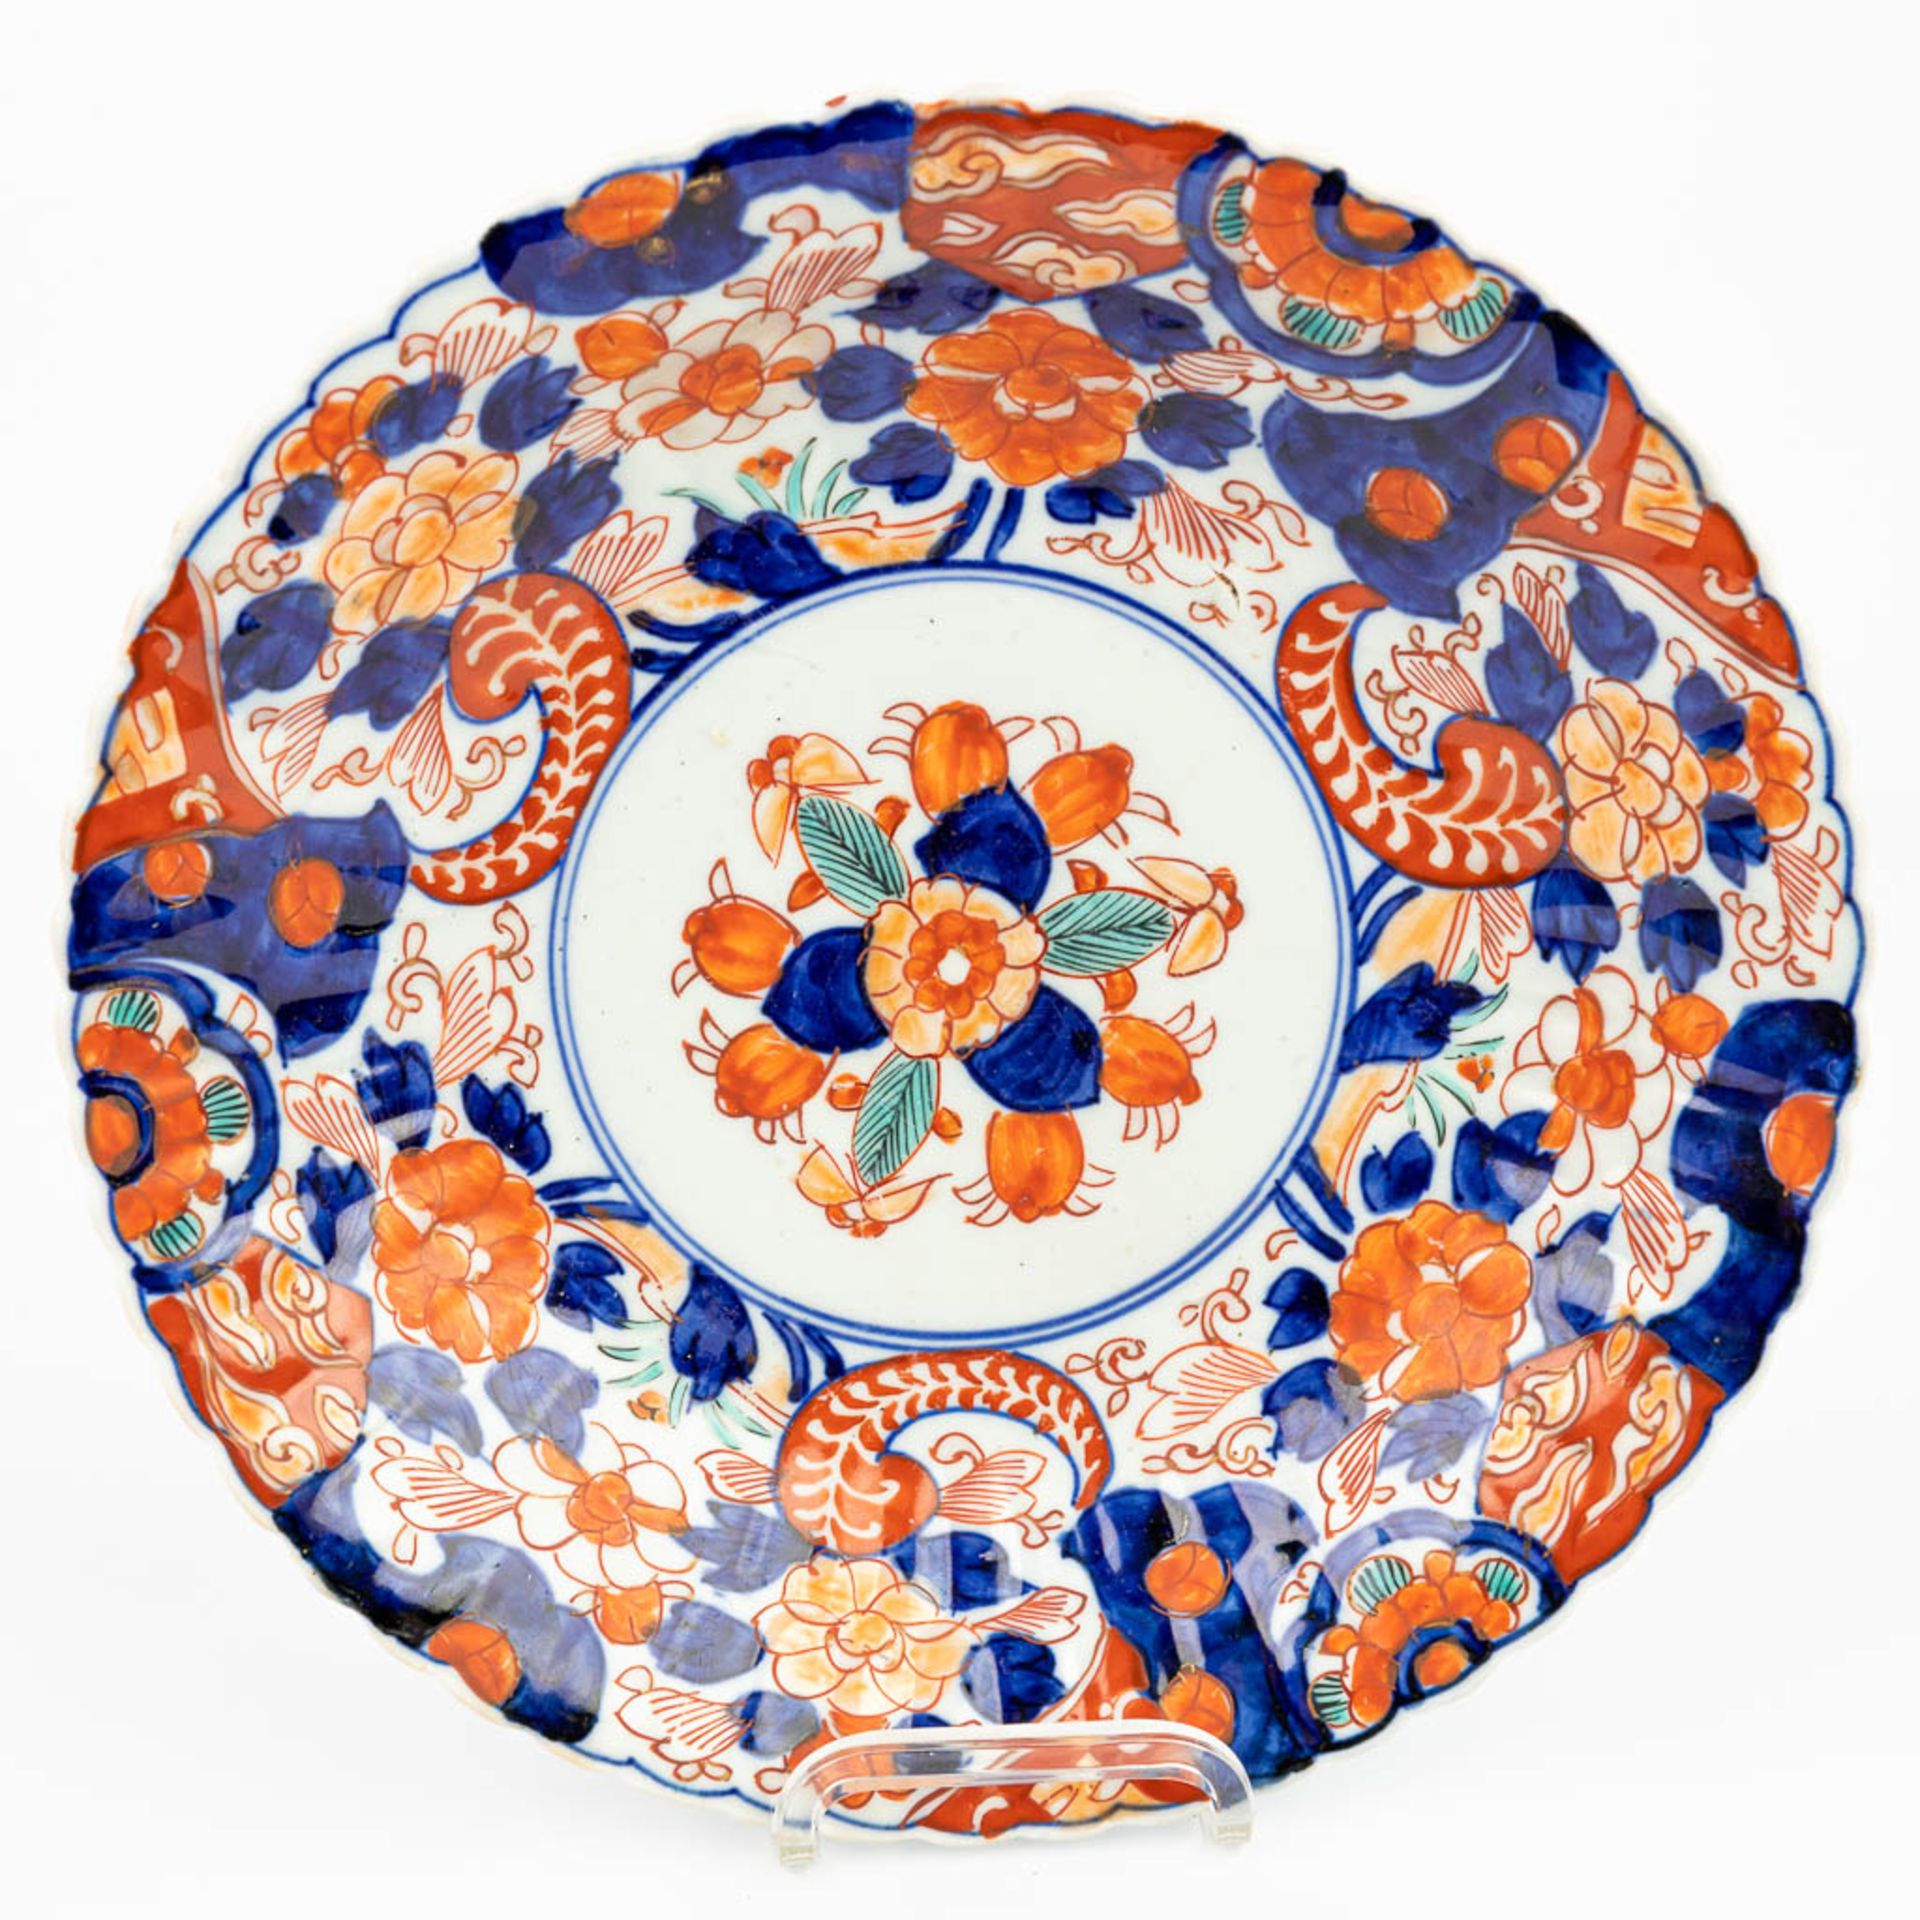 A collection of 7 Chinese and Japanese plates made of porcelain, Imari. - Image 12 of 13